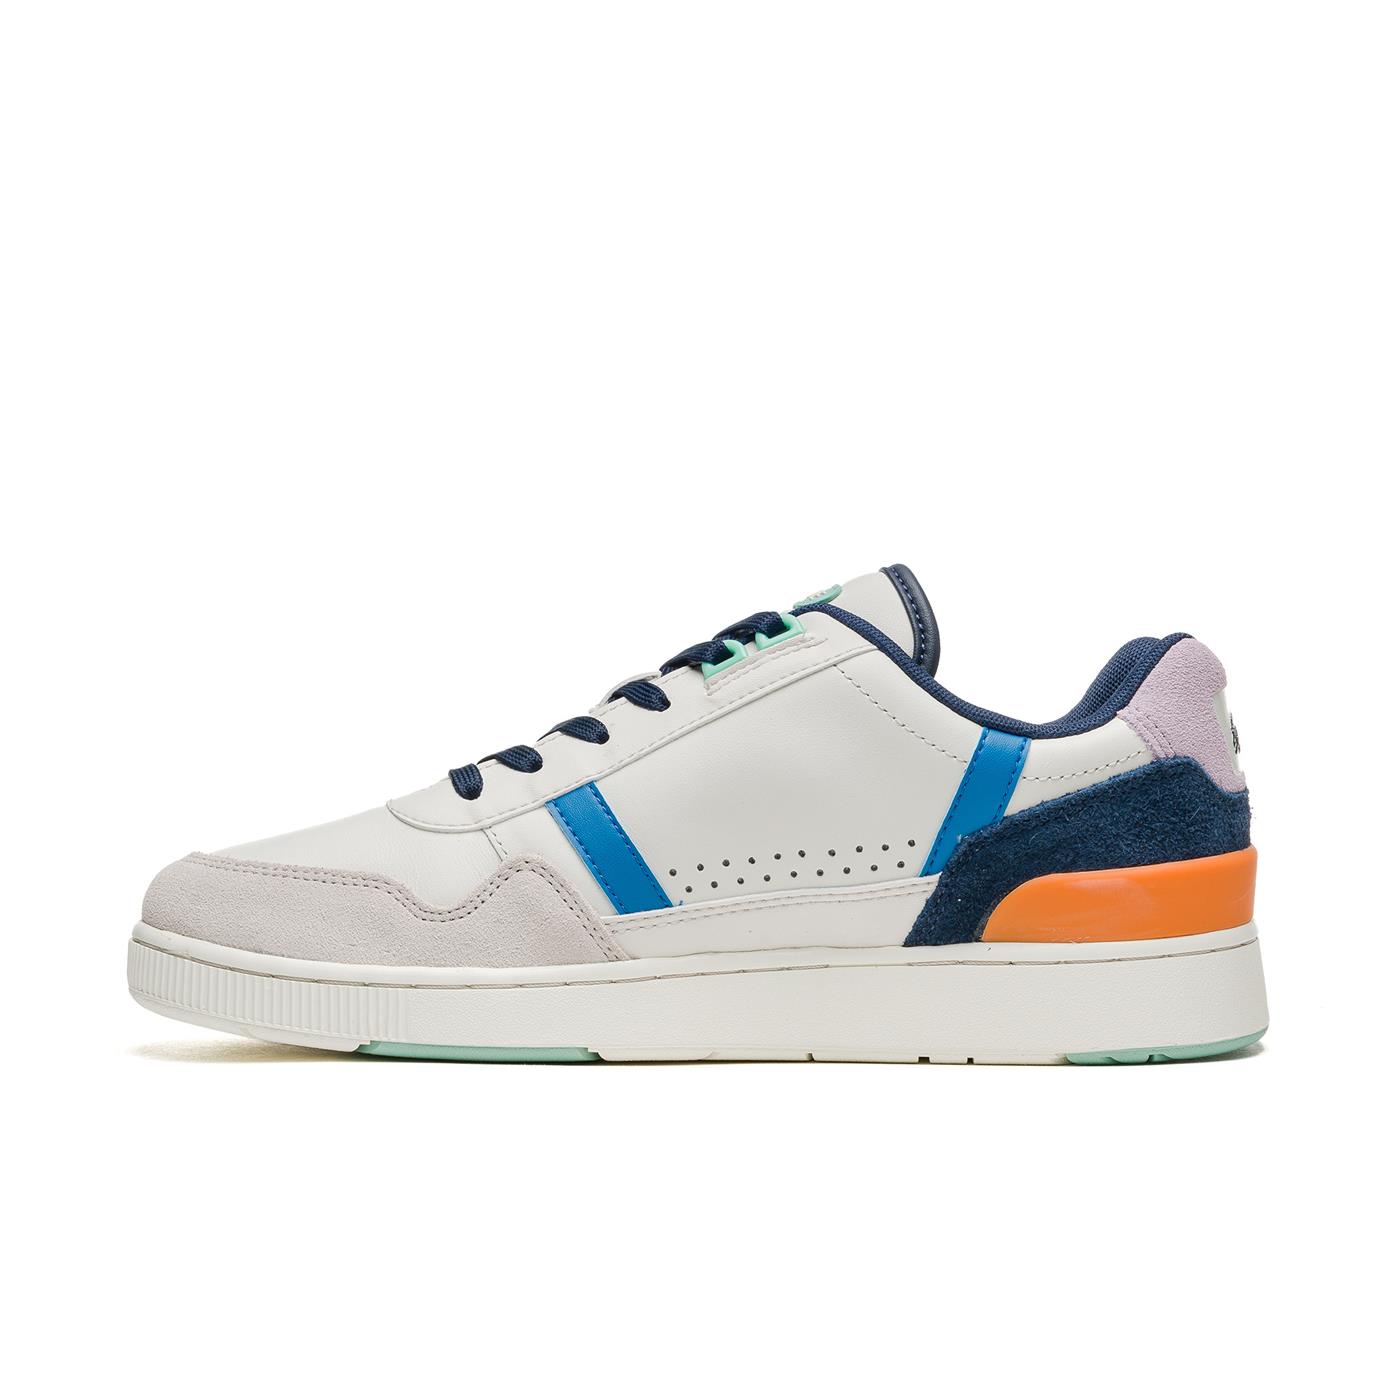 crack synd Duchess Lacoste T-Clip Off White/Blue | ChronosconsultingShops